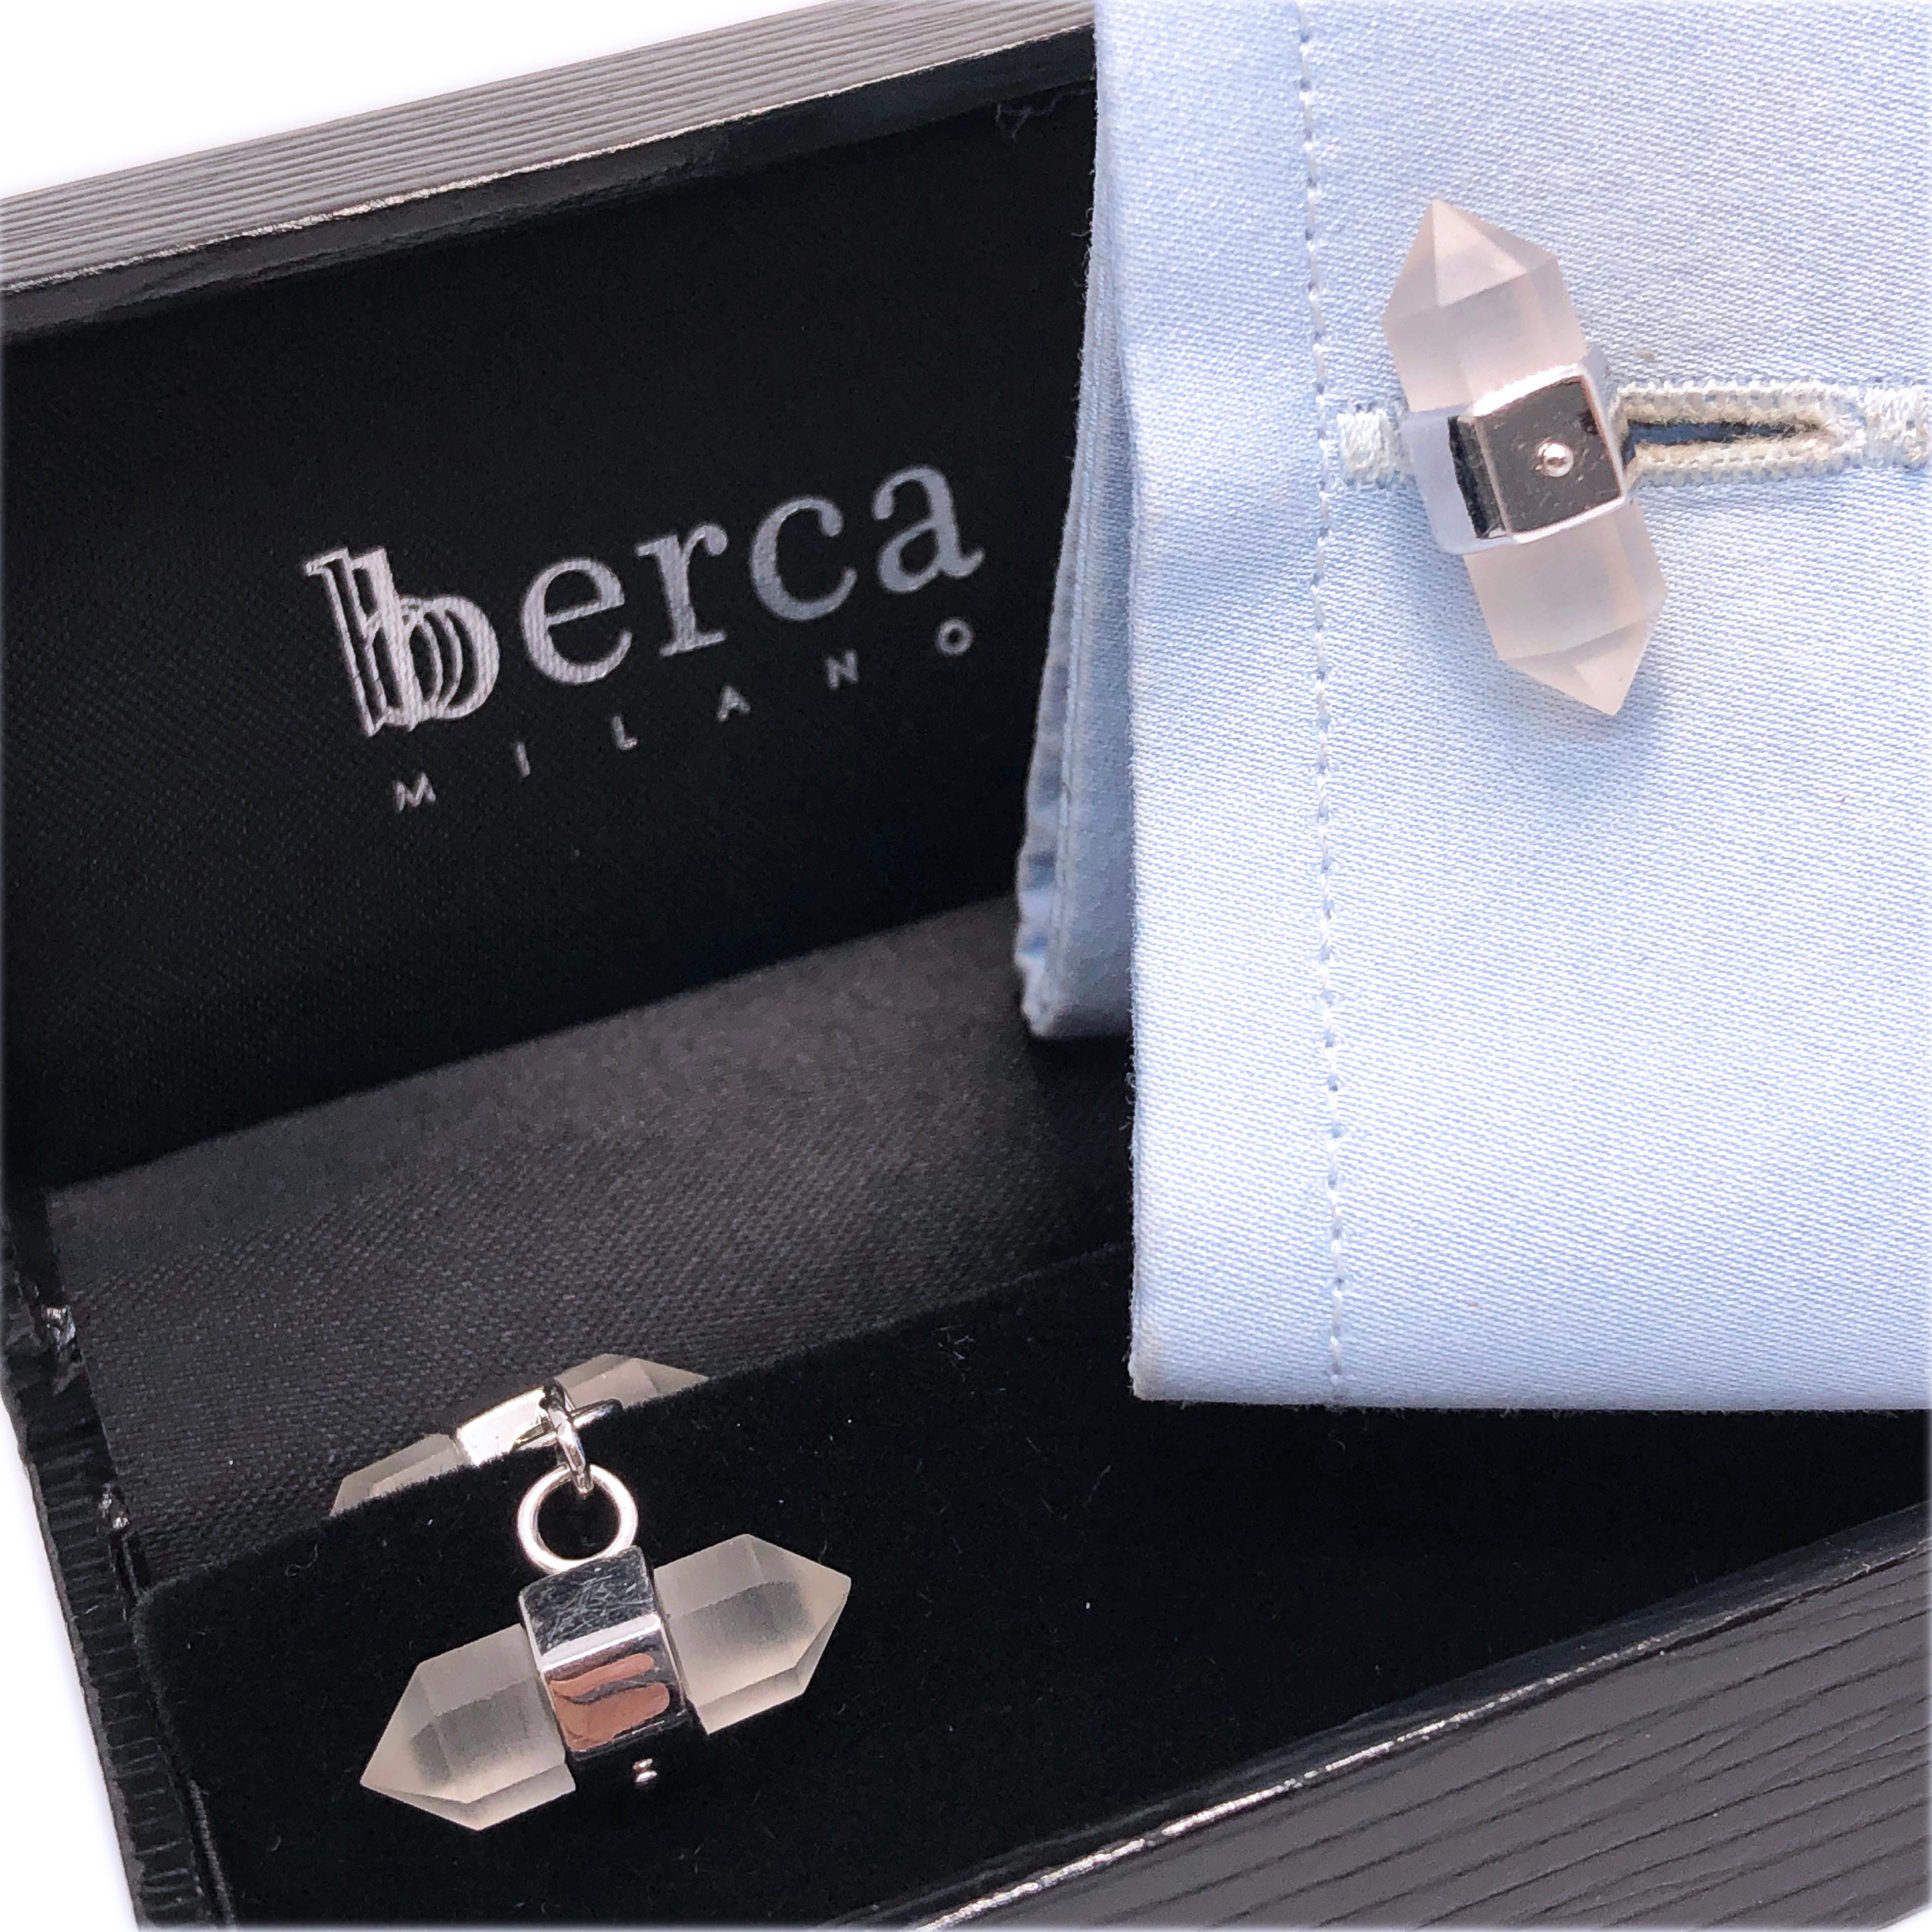 Berca Hand Inlaid Rock Crystal Pencil Shaped 18 Karat White Gold Cufflinks For Sale 2